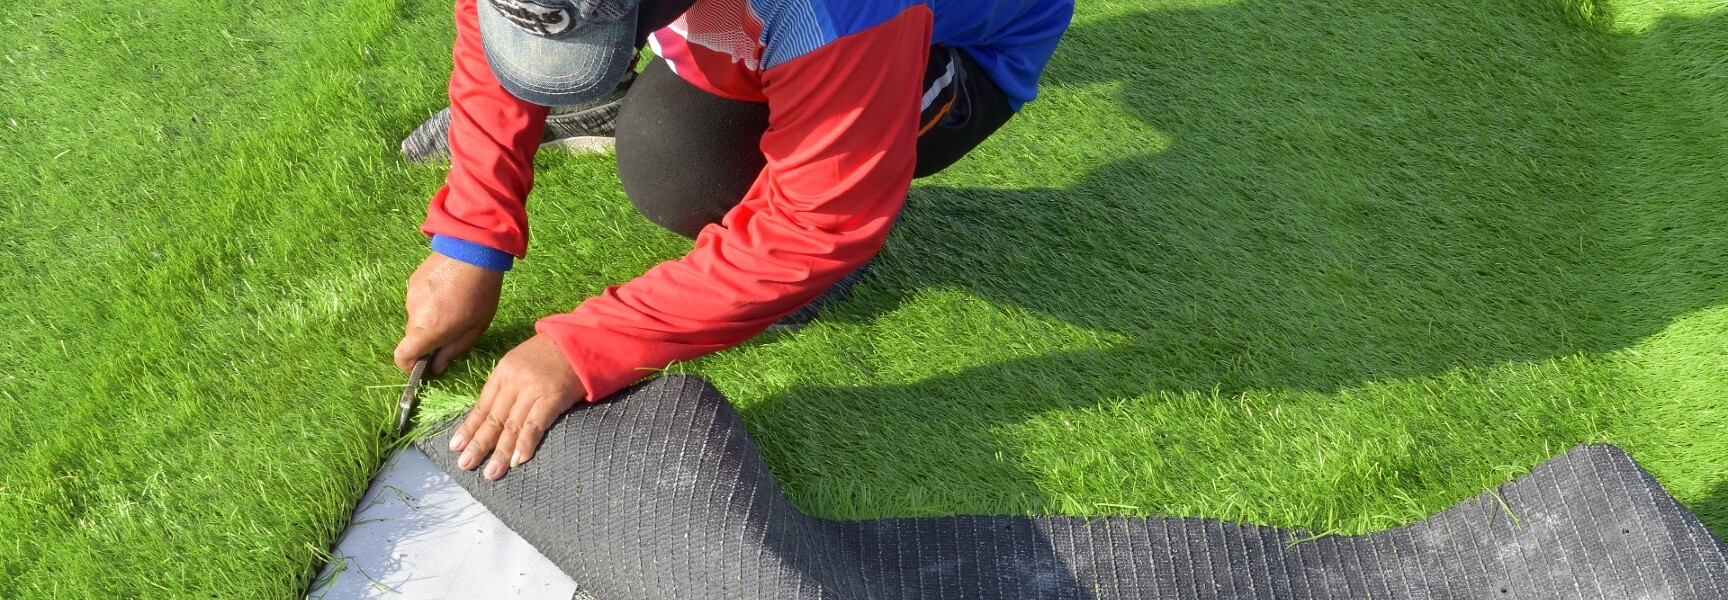 A close-up photo of a person's hand holding a small patch of green turf, with dirt and grass visible in the background.